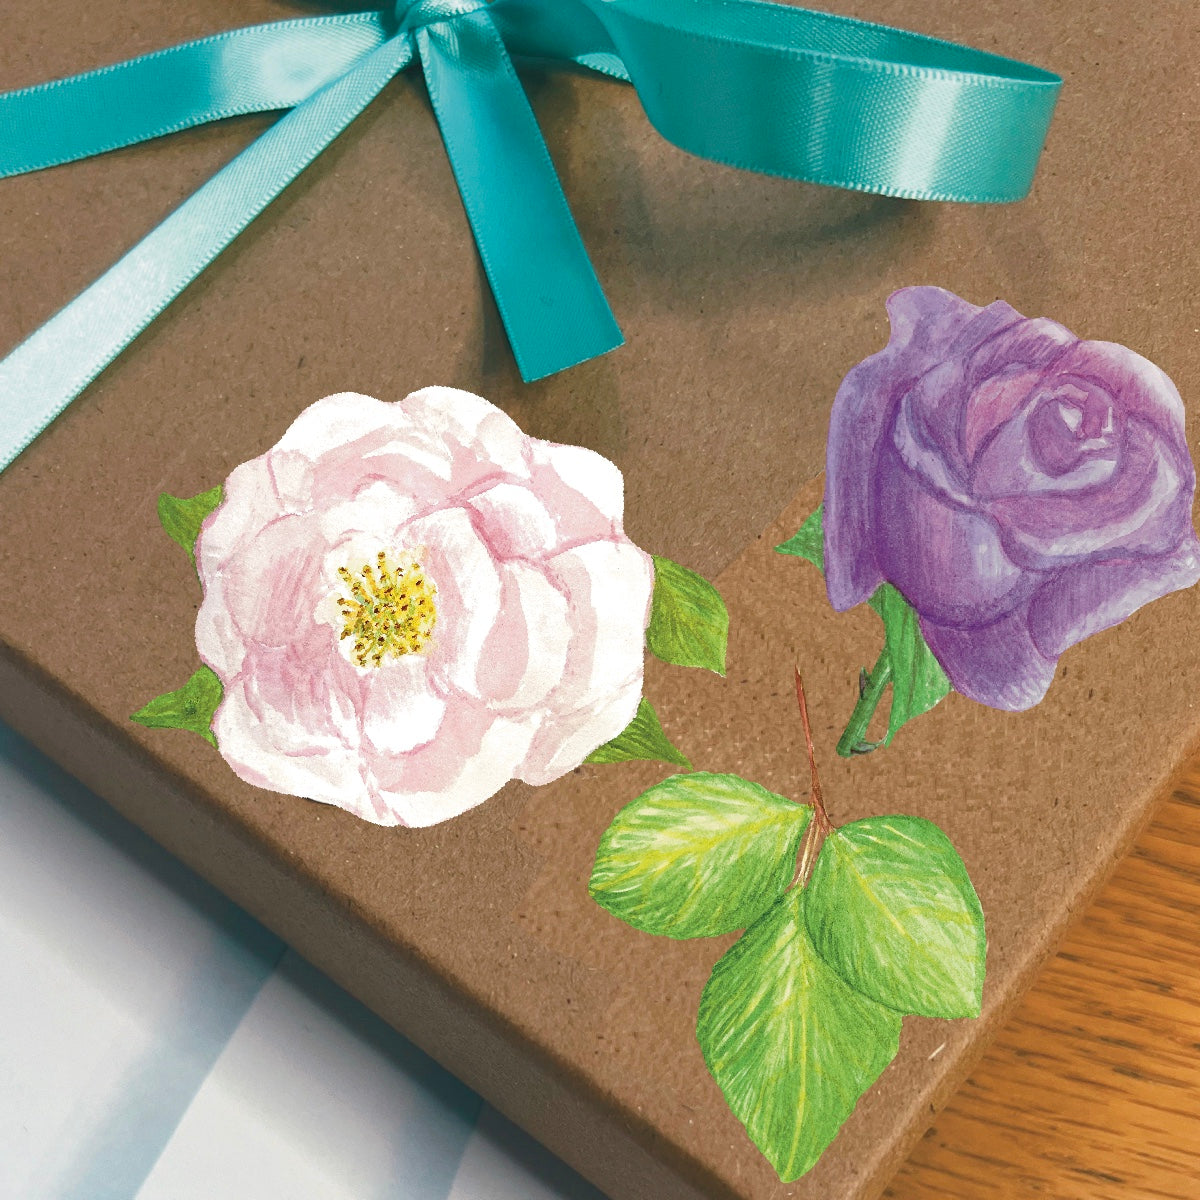 A blossoming pink and lavender rose set of die cut stickers with and easier to peel edge on a gift box wrapped with a blue ribbon